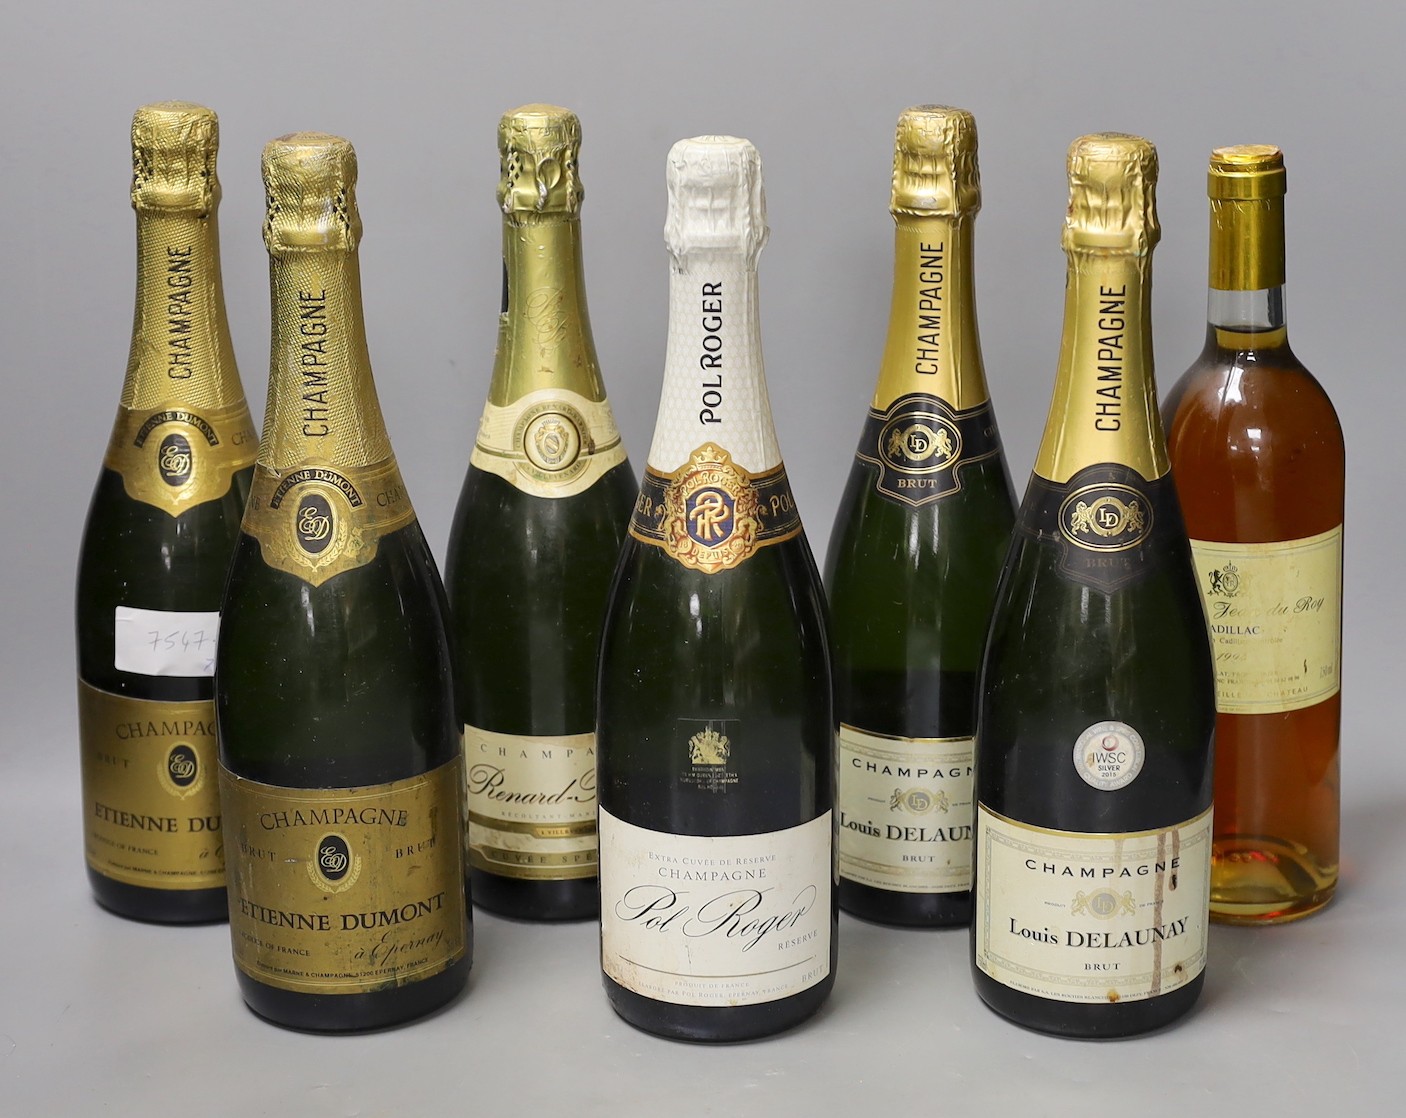 Two bottles of Etienne Dumont NV Champagne, two bottle of Louis Delauney NV Champagne, one bottle of Pol Roger NV Champagne, one bottle of Renard Barnier and a bottle of Chateau Jean Du Roy Cadillac , 1994. (7)